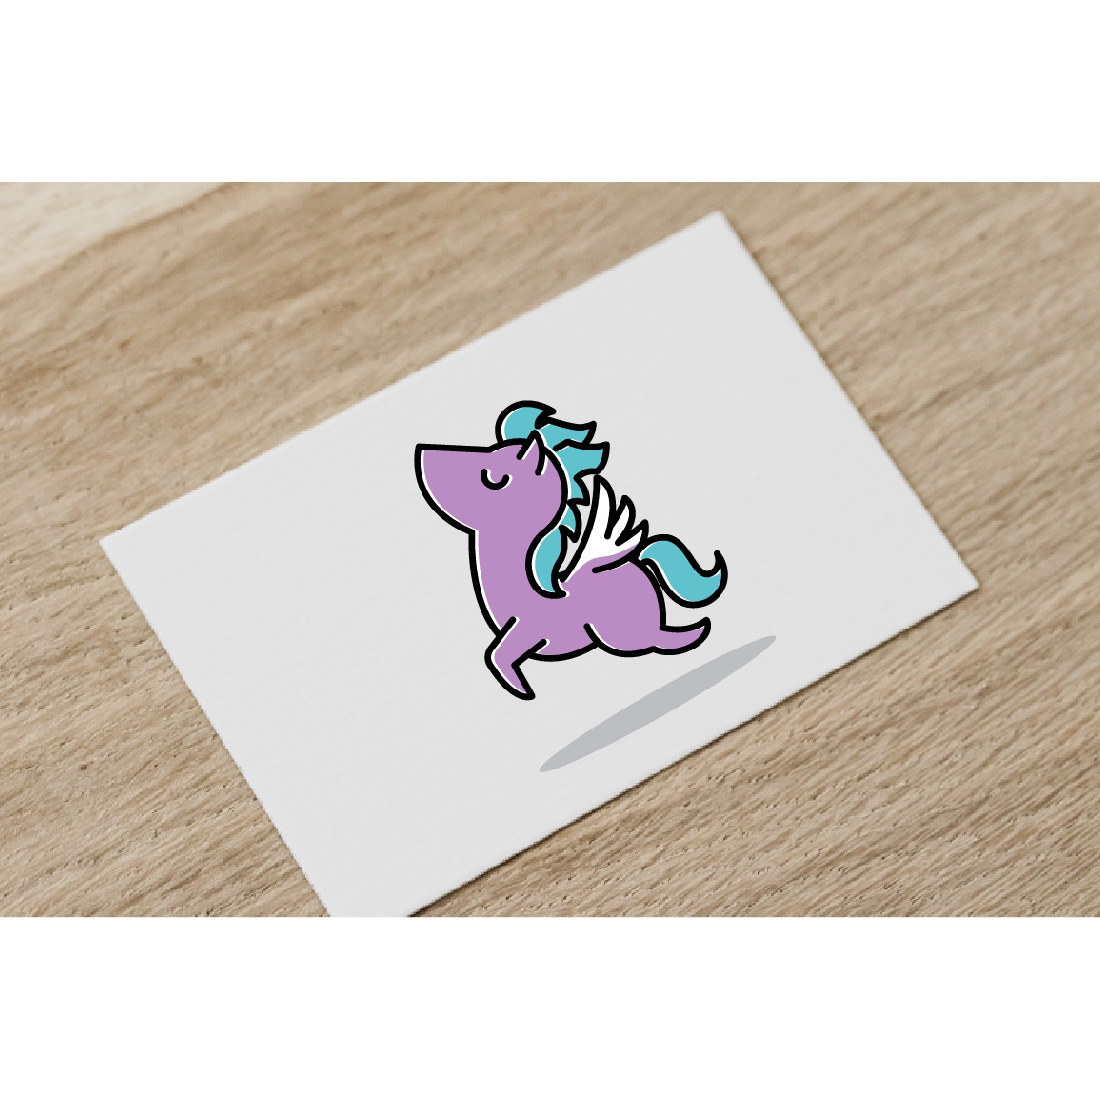 Cute Little Horse Jumping Flying Wing Animal Cartoon cover.